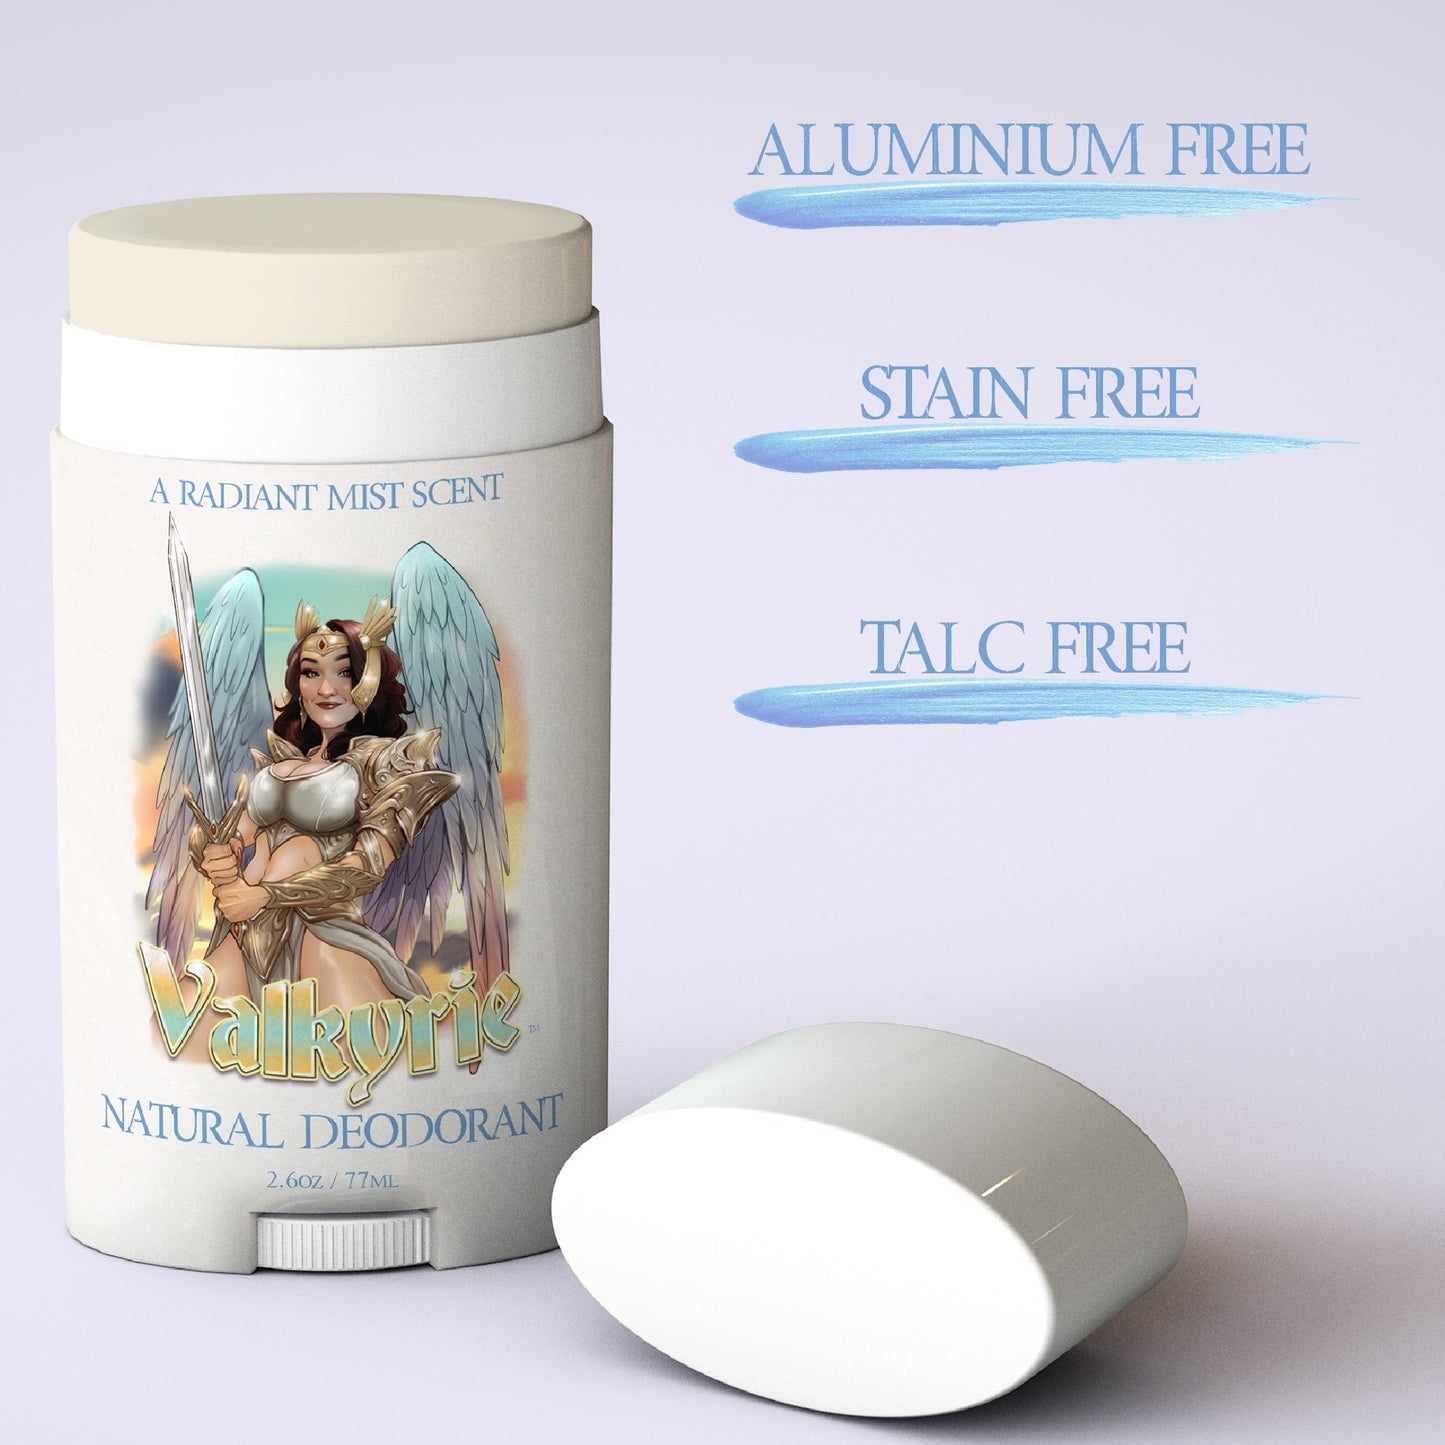 The Valkyrie - Natural Deodorant